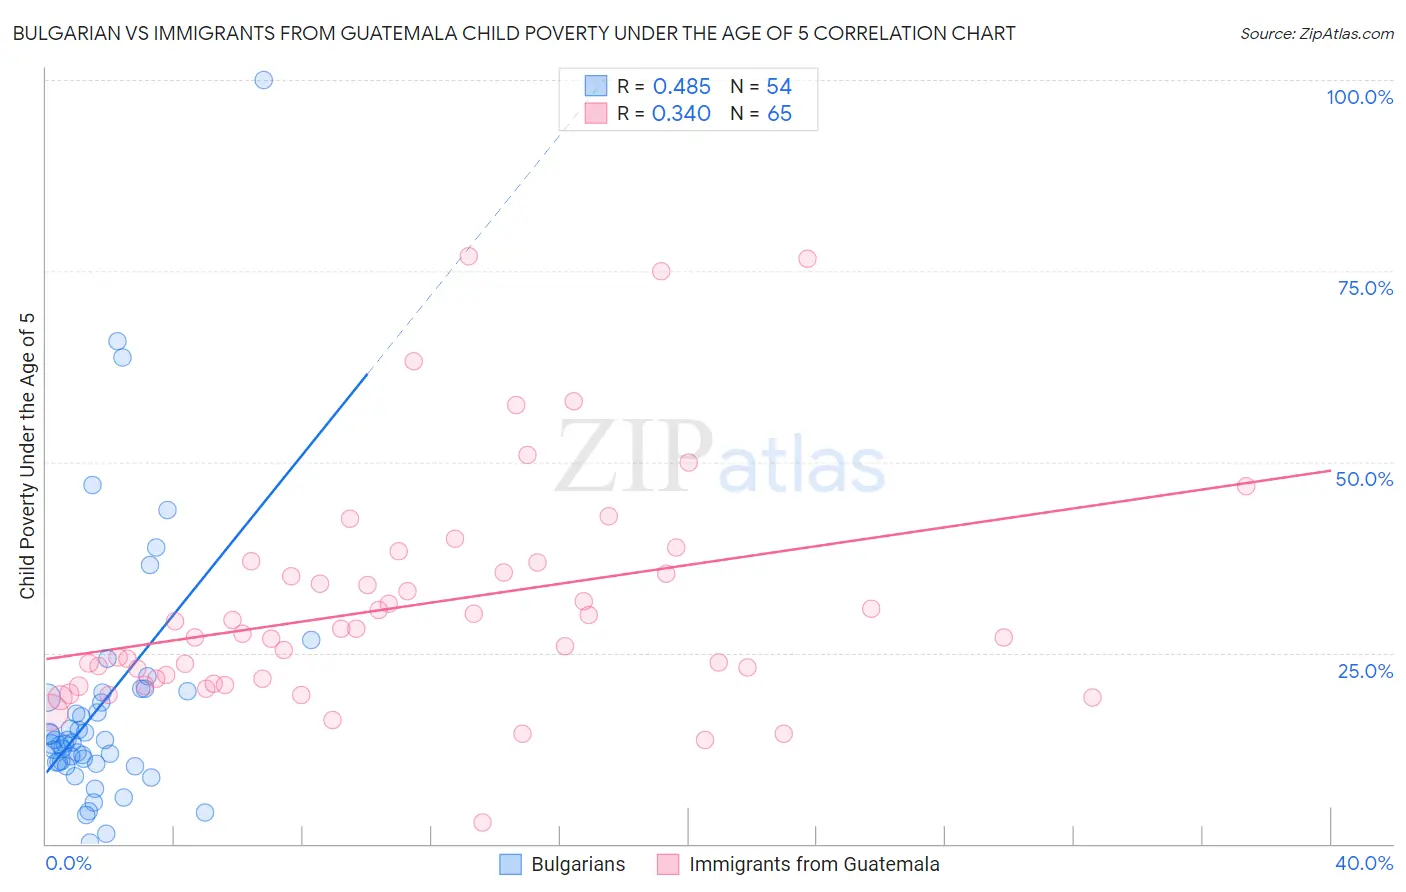 Bulgarian vs Immigrants from Guatemala Child Poverty Under the Age of 5